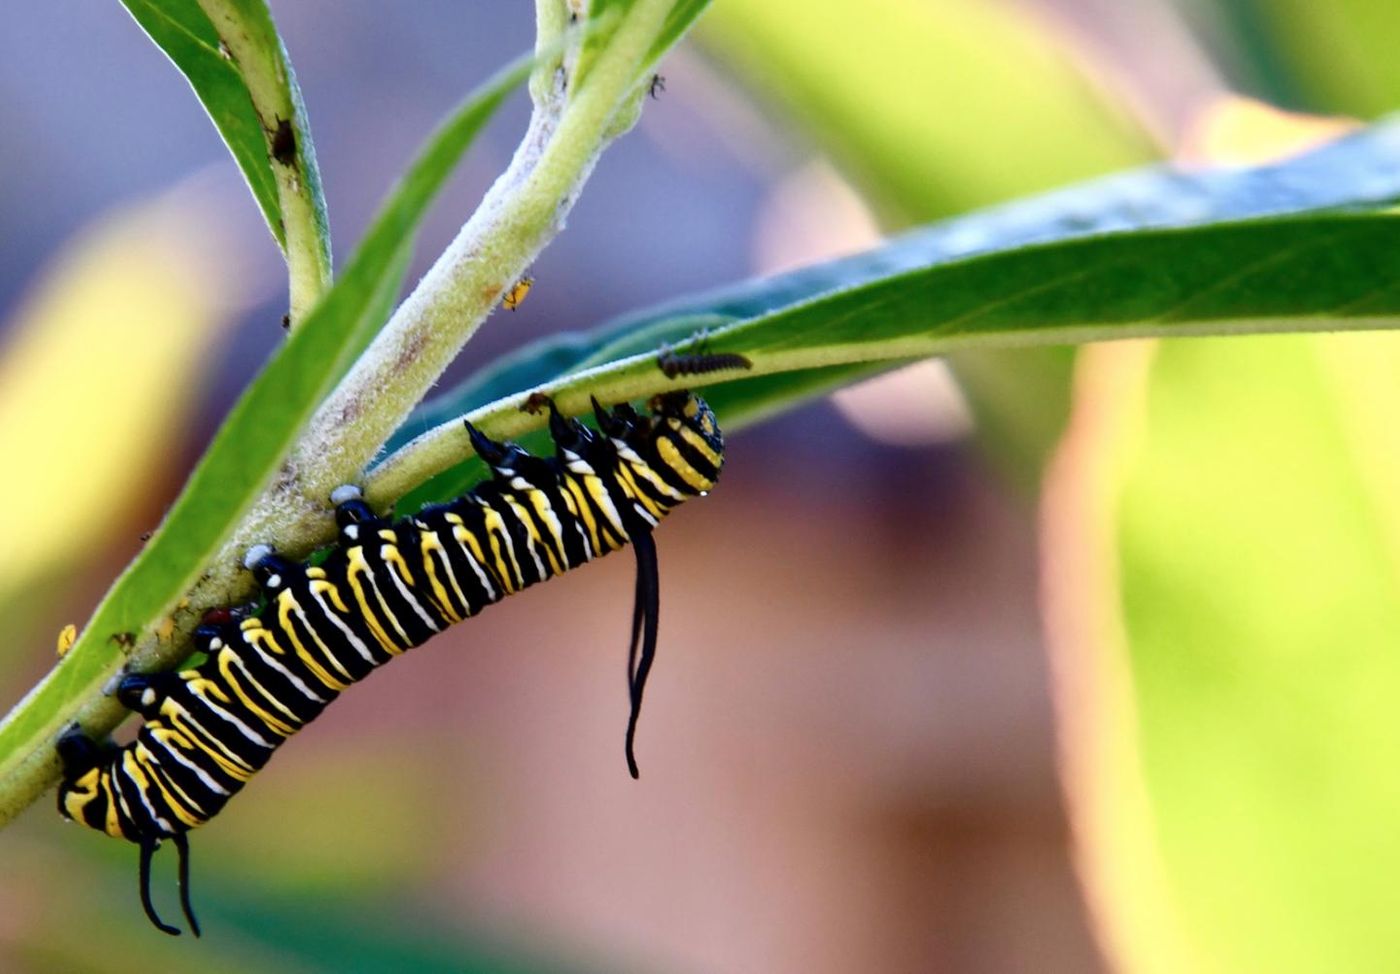 A monarch butterfly caterpillar, which doesn't tolerate freezing weather, and typically overwinters in Mexico. They overwinter in California now, thanks to milder winter temperatures. / Credit: Noah Whiteman, UC Berkeley